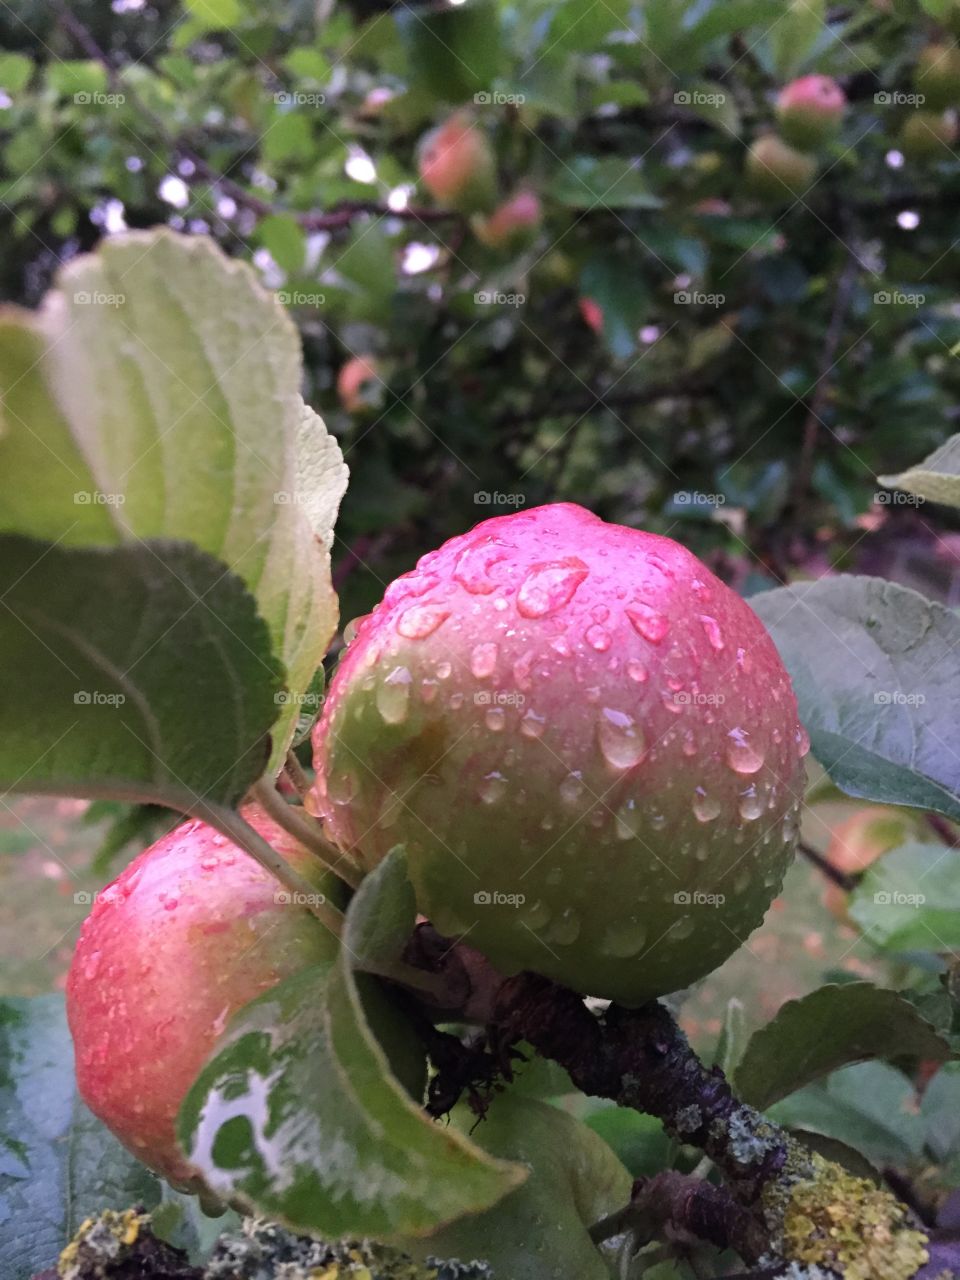 Apples with raindrops